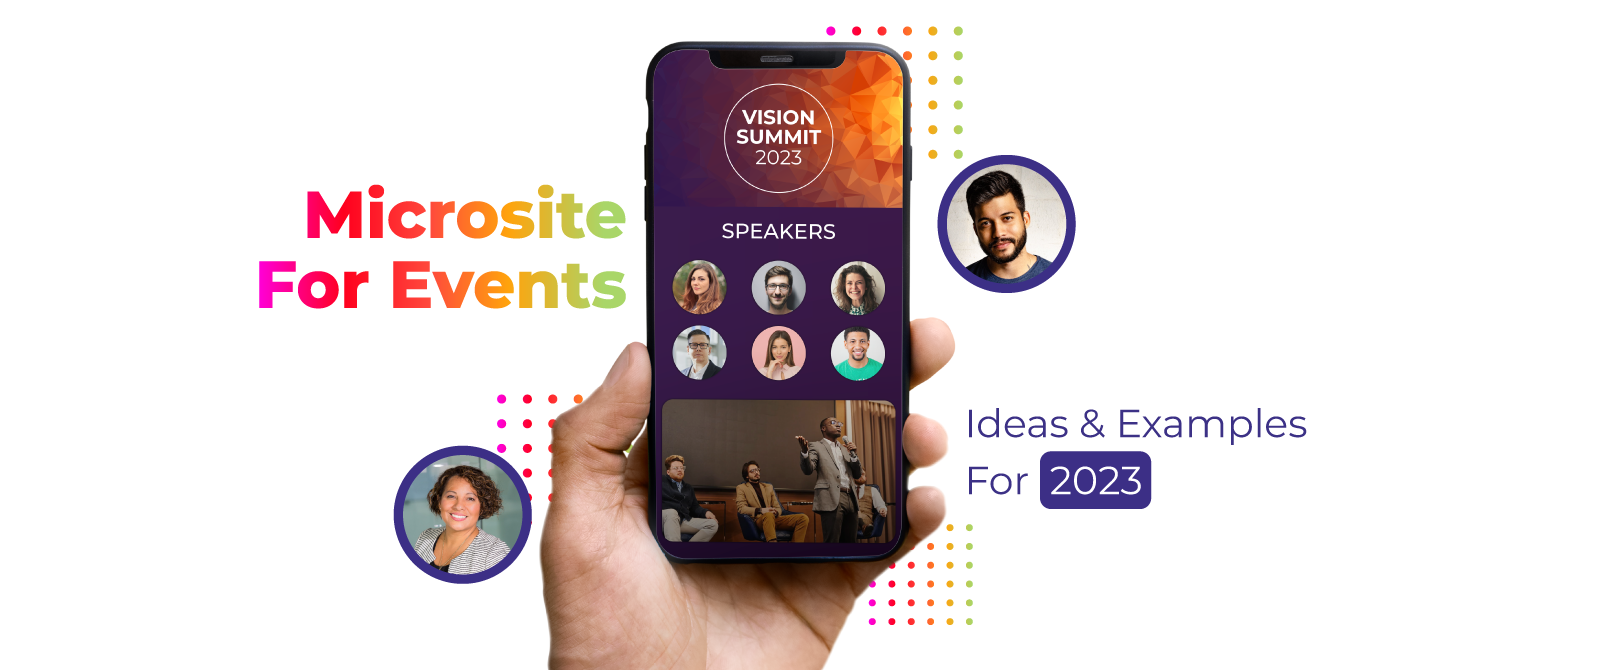 Microsite For Events Ideas & Examples For 2023